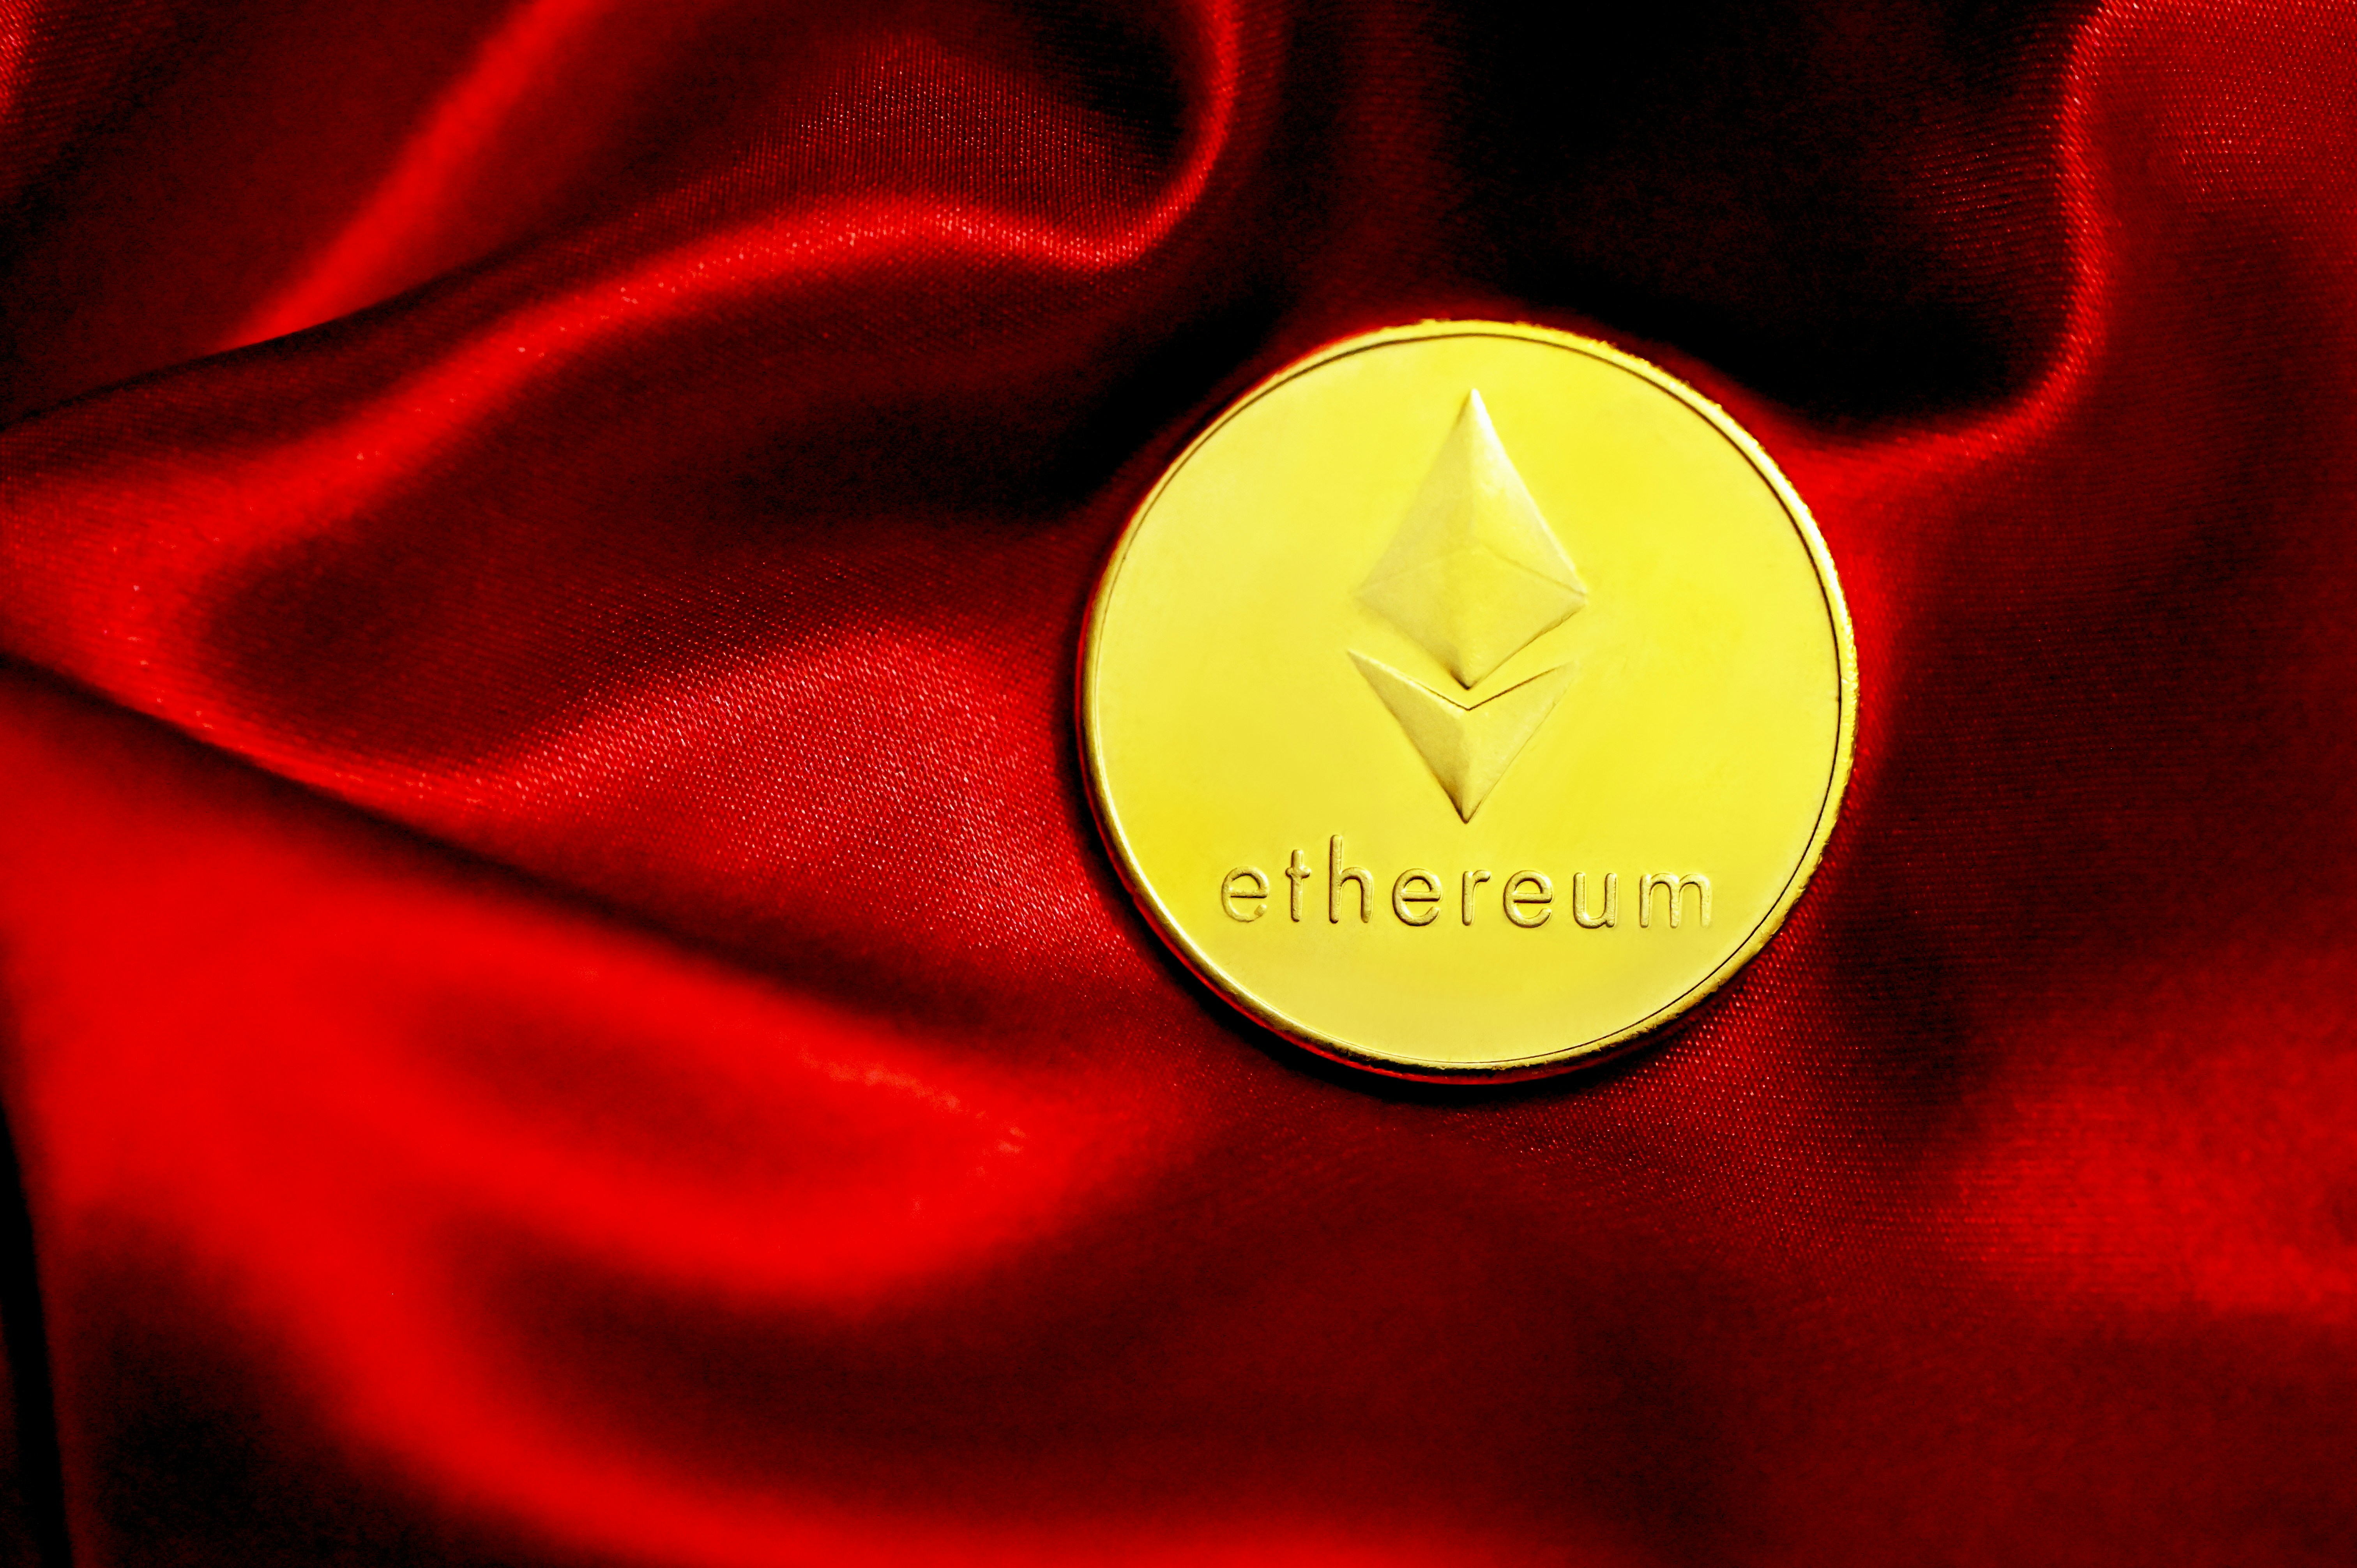 A single Ethereum coin placed on red velvet